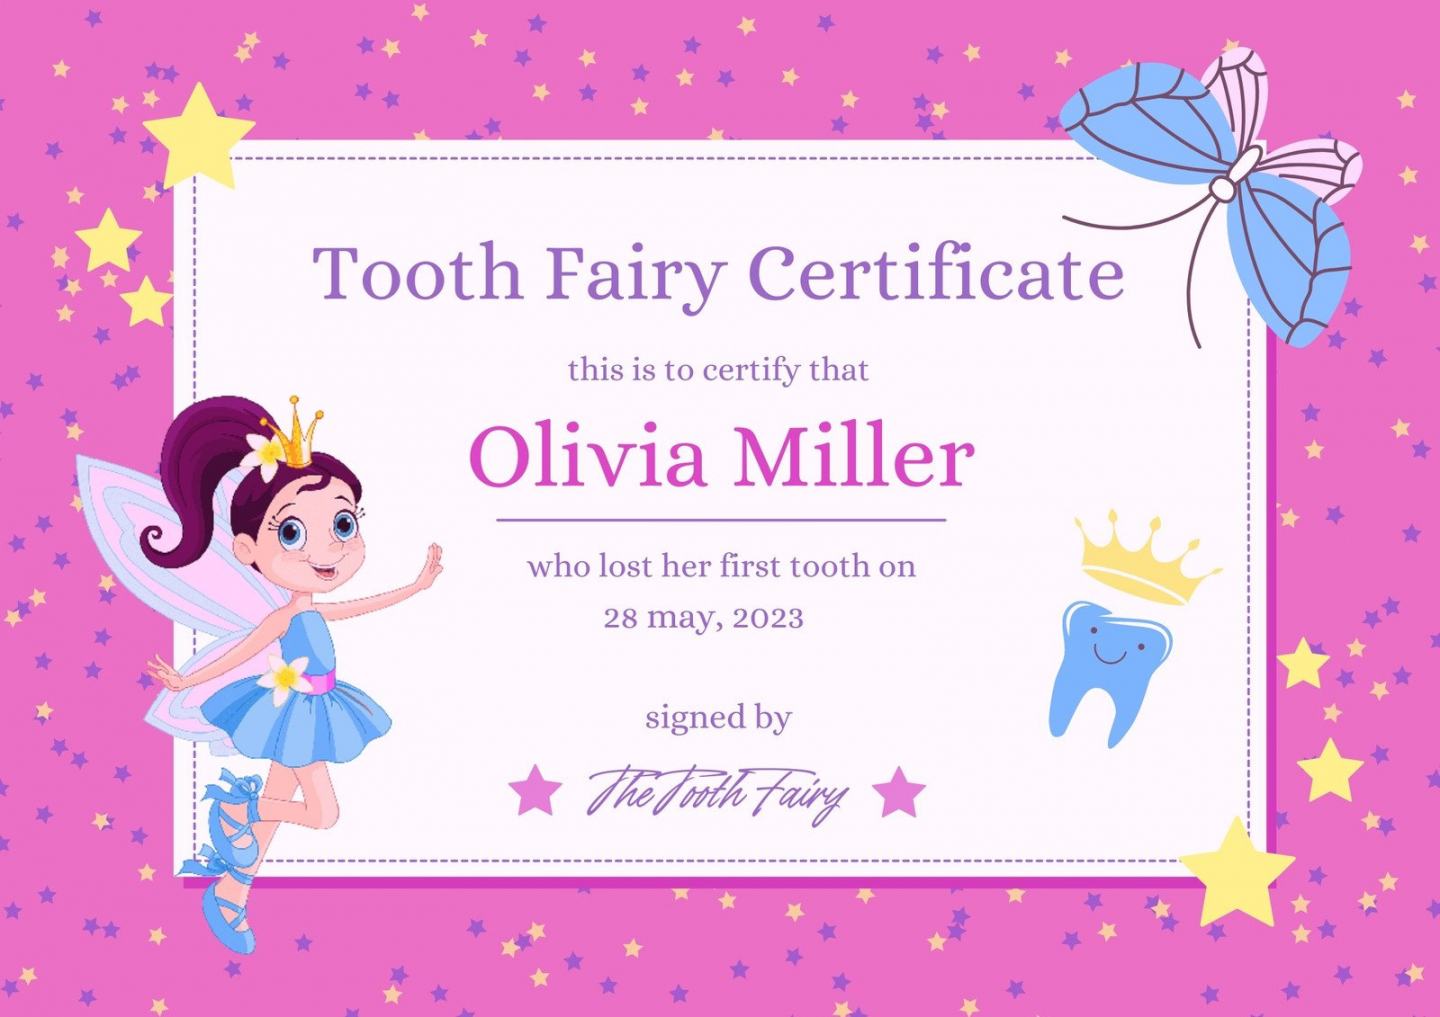 Free customizable tooth fairy certificate templates  Canva - FREE Printables - Free Tooth Fairy Printable